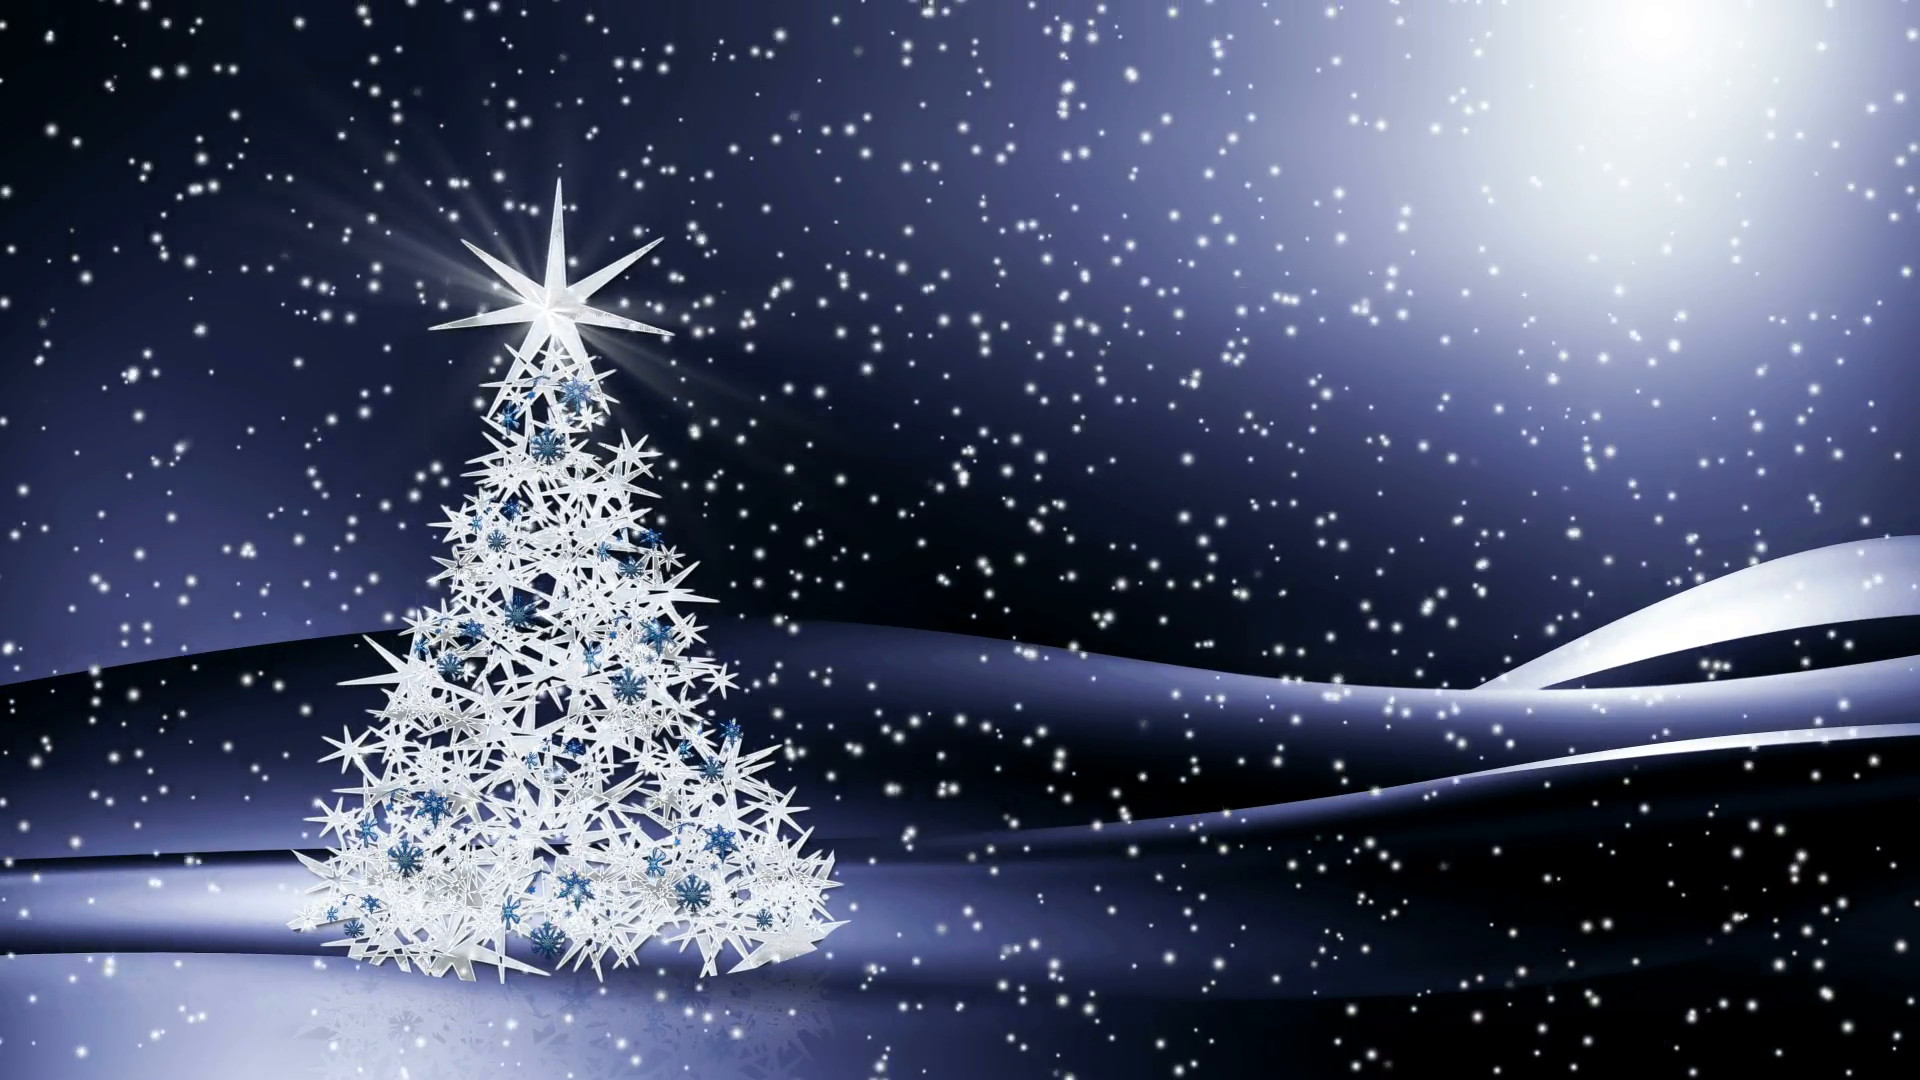 Blue Christmas Backgrounds (41+ images)